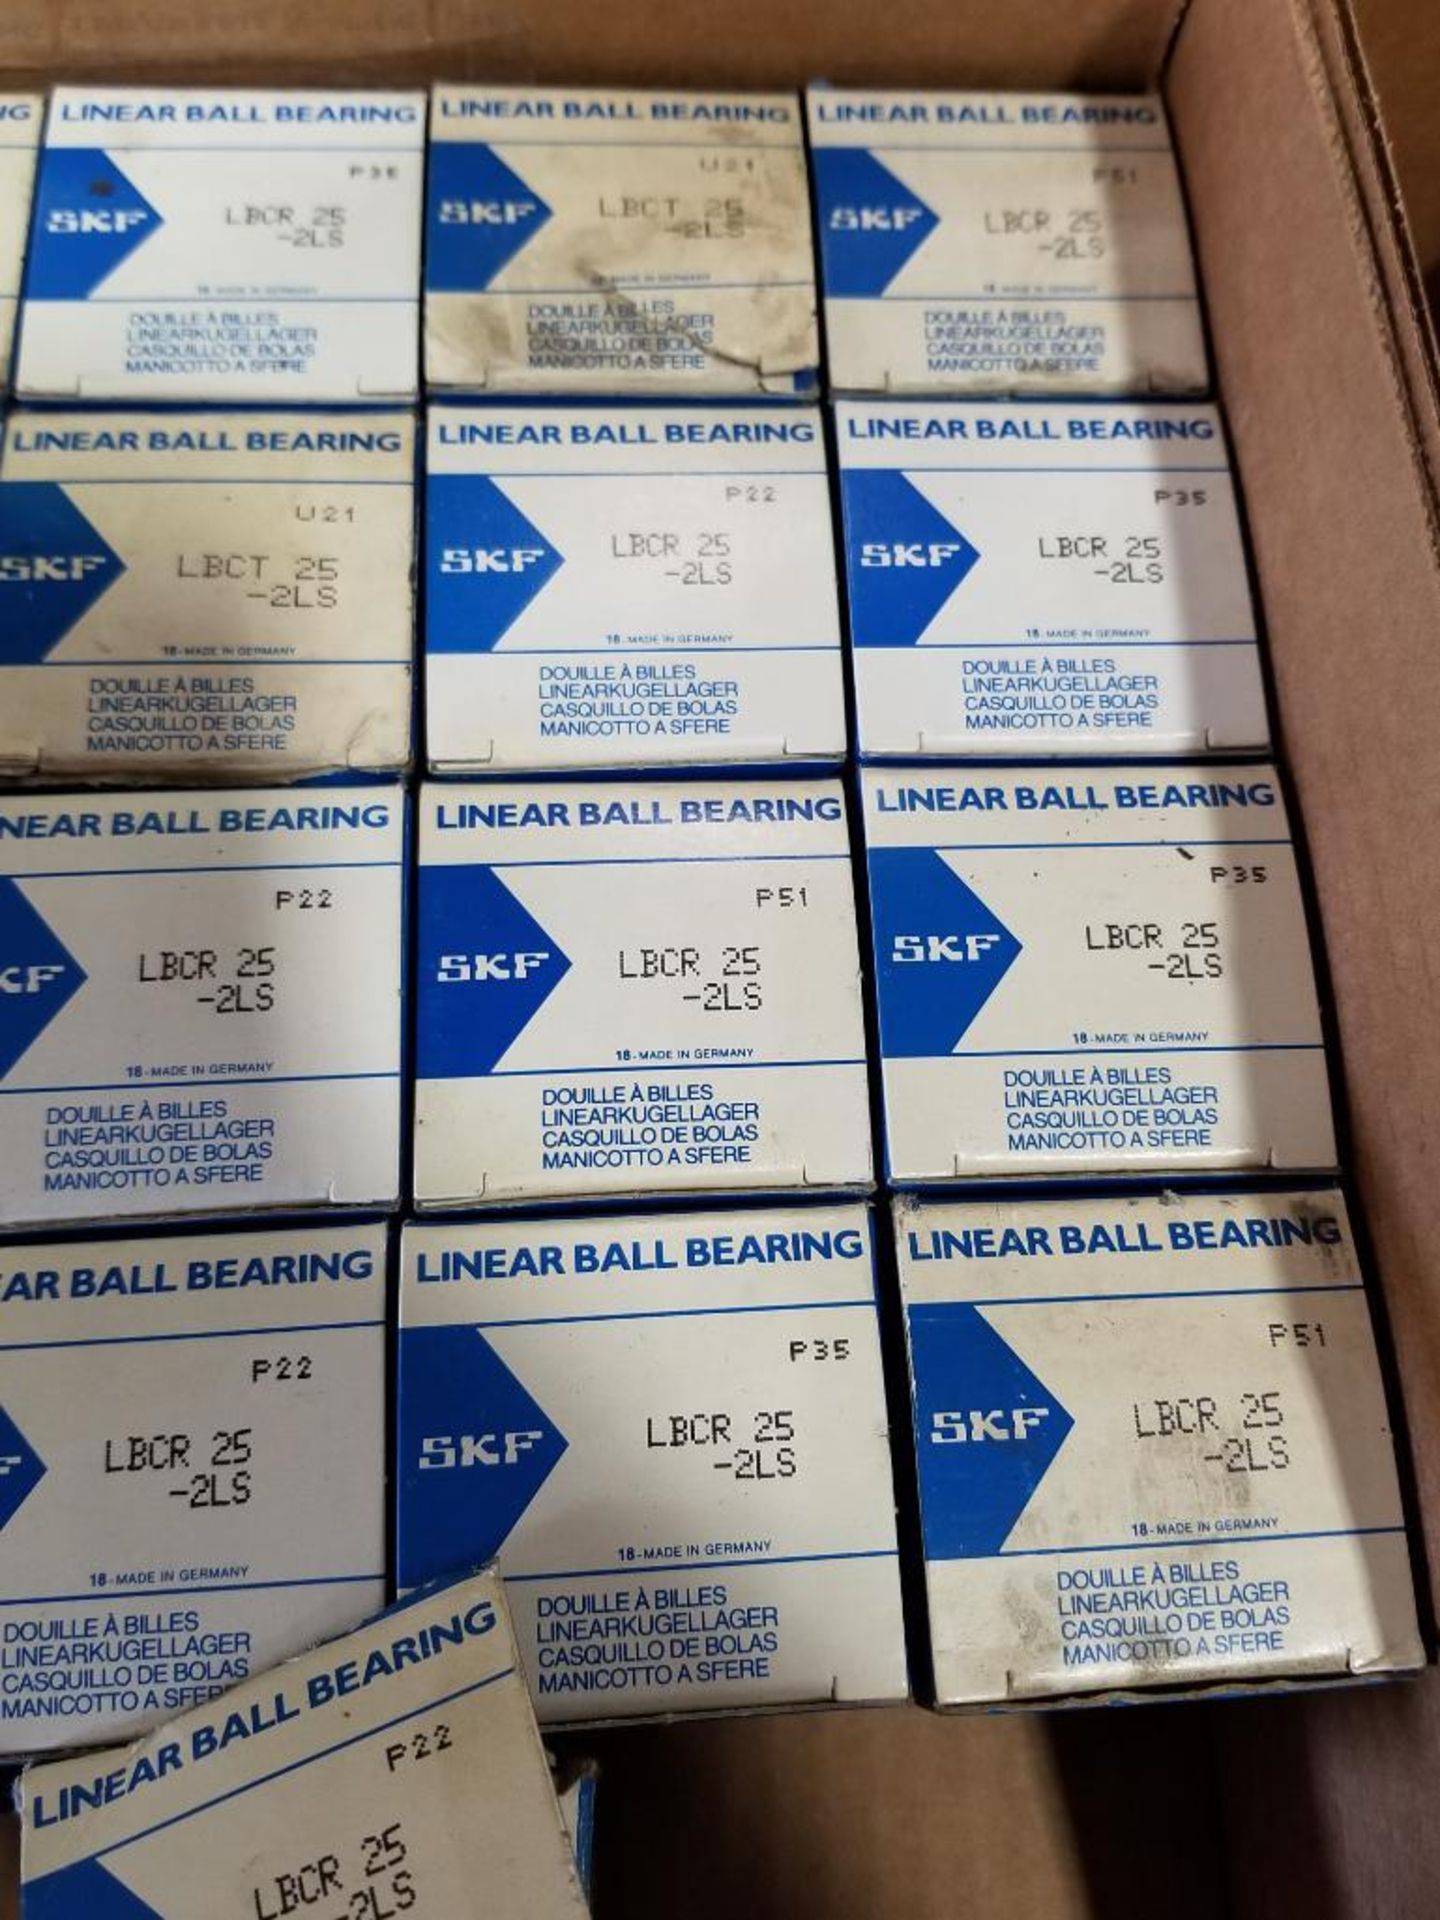 Qty 25 - SKF linear bearings. Part number LBCR-25-2LS. New in box. - Image 4 of 6